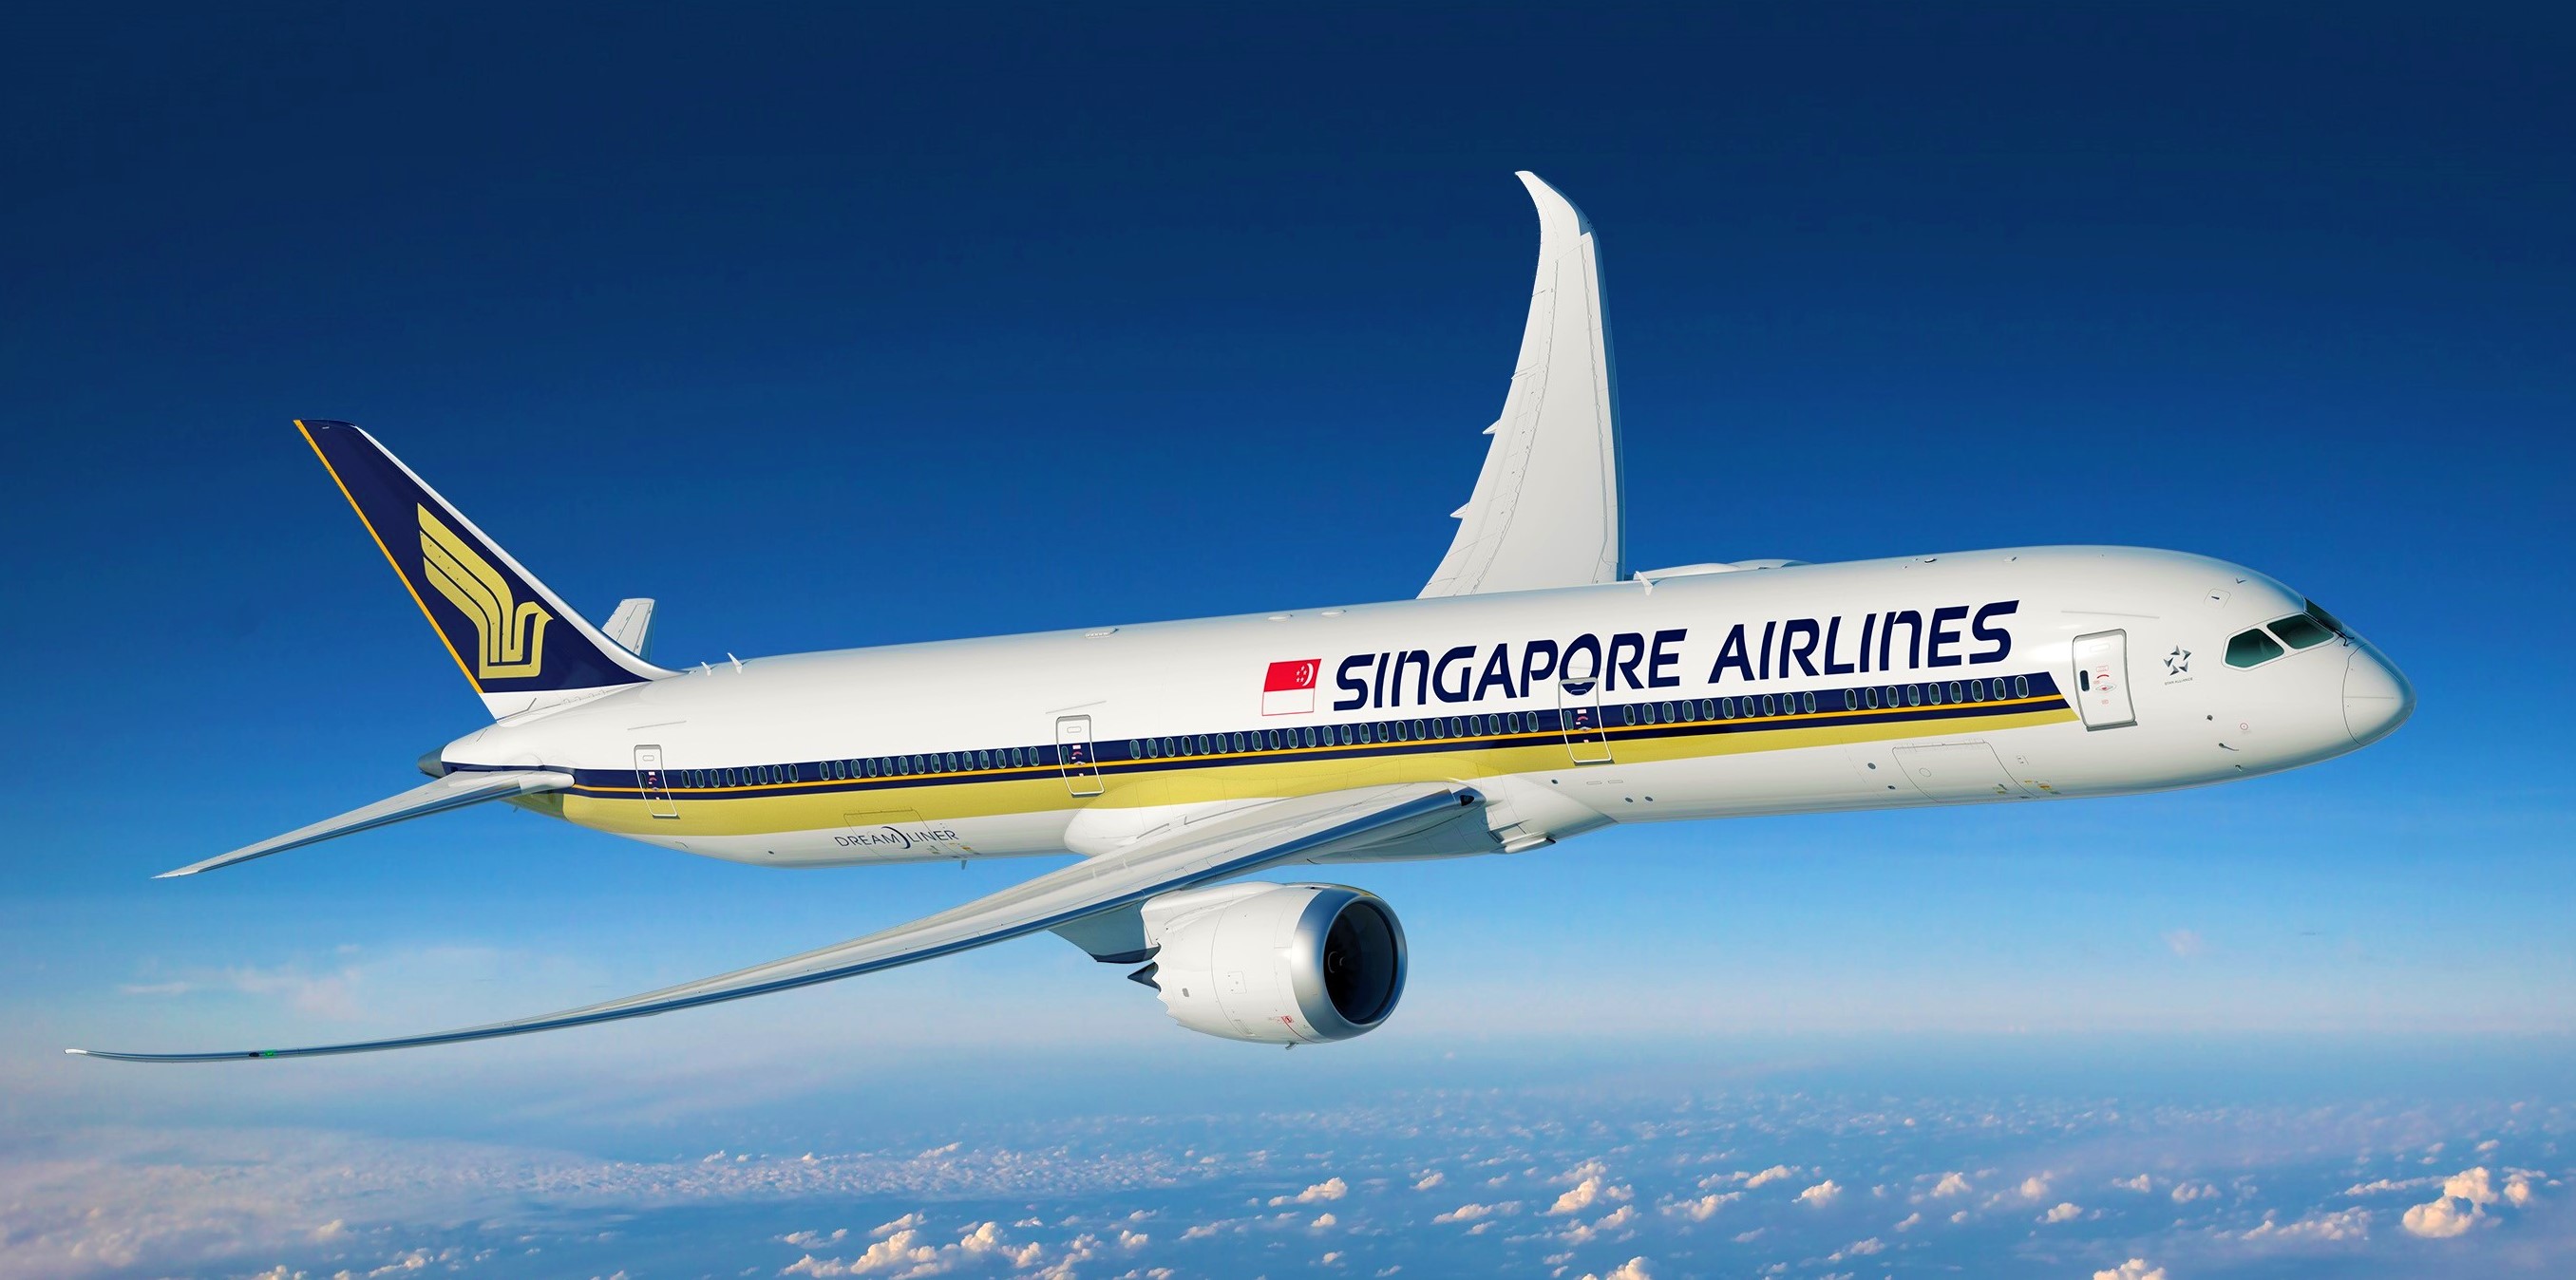 Job Opening Alert - Singapore Airlines is recruiting for Operations , Commercial and HR job profiles !